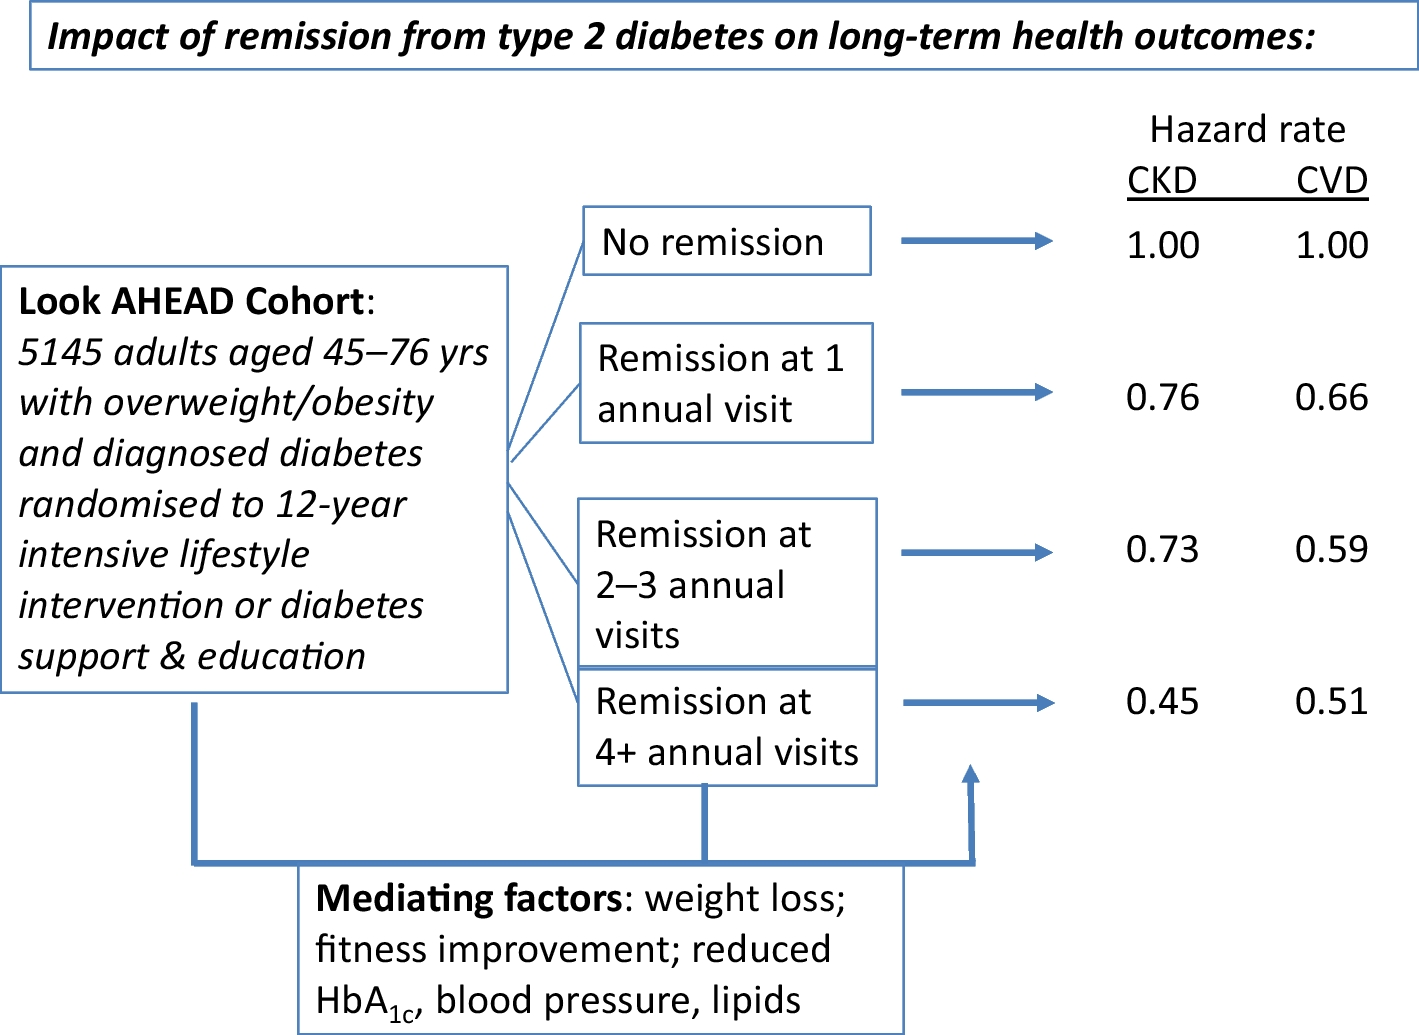 Impact of remission from type 2 diabetes on long-term health outcomes: findings from the Look AHEAD study